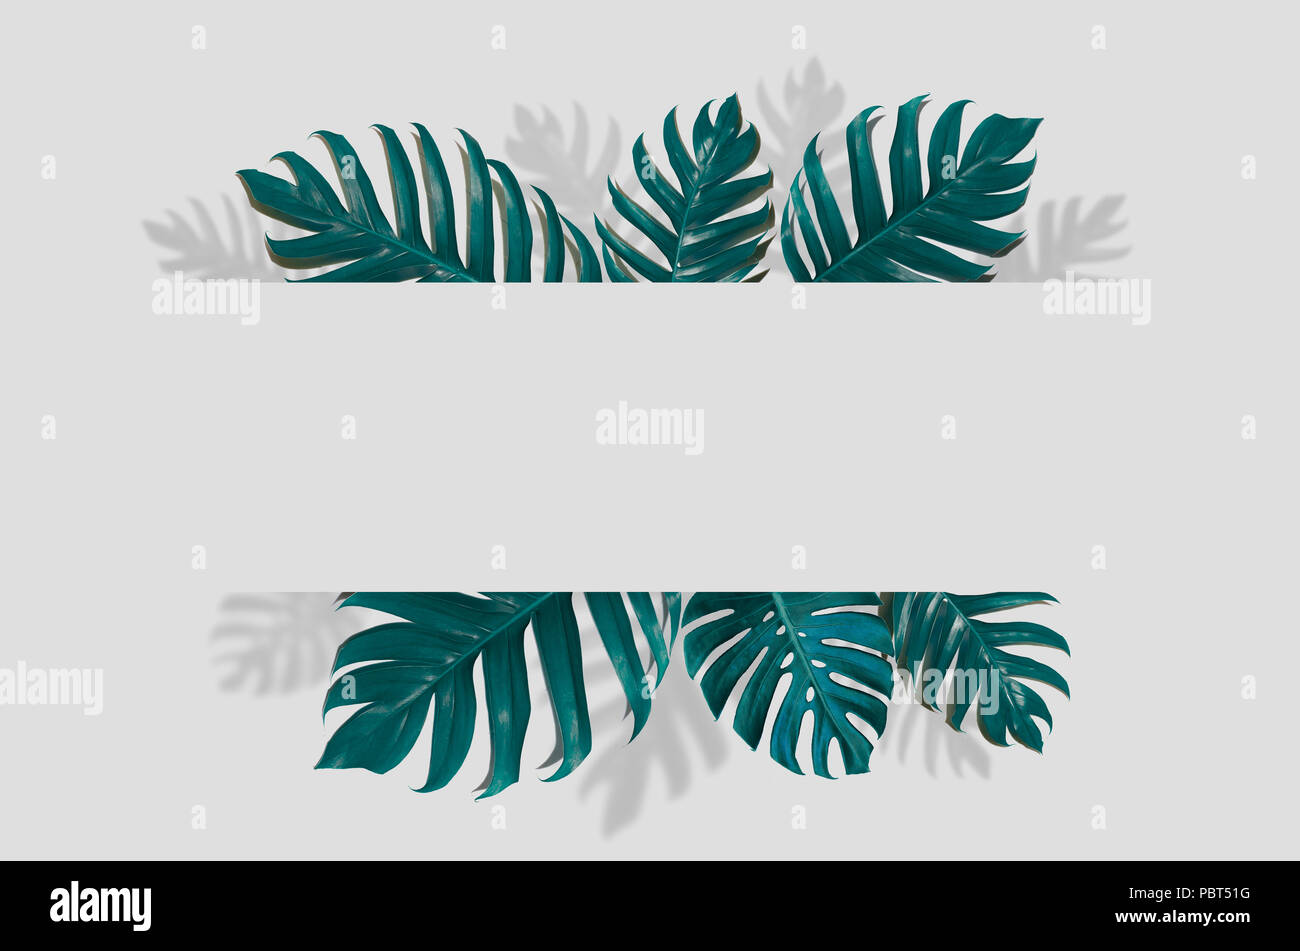 Concept art Minimal background design Leaves monster blue Tropical and  leaves in vibrant bold gradient trendy Summer Tropical Leaves Design Stock  Photo - Alamy